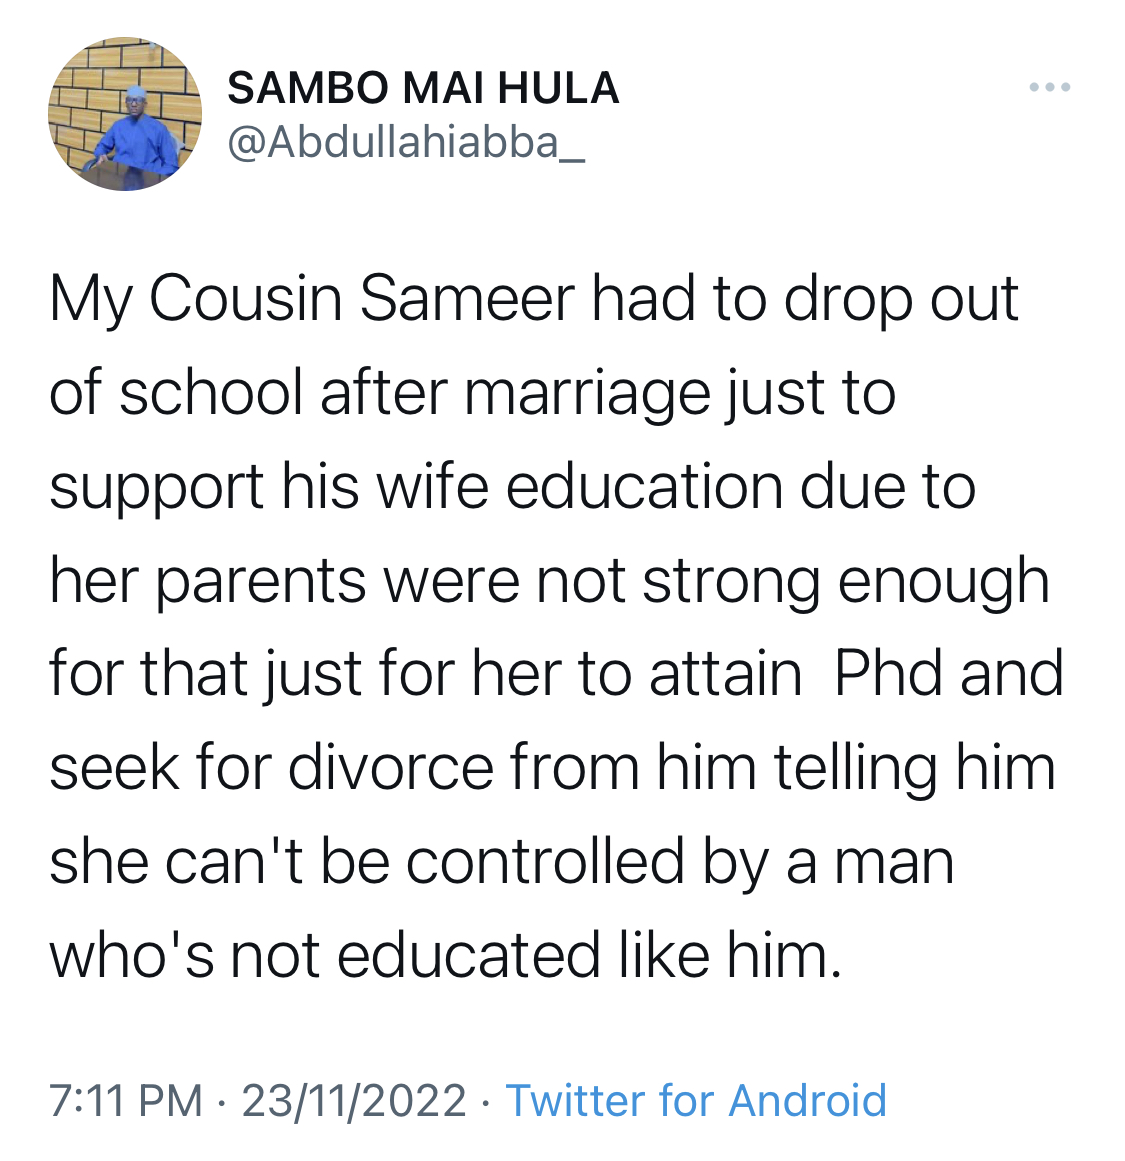 He’s not up to my level academically - Woman dumps Husband who dropped out to train her in school